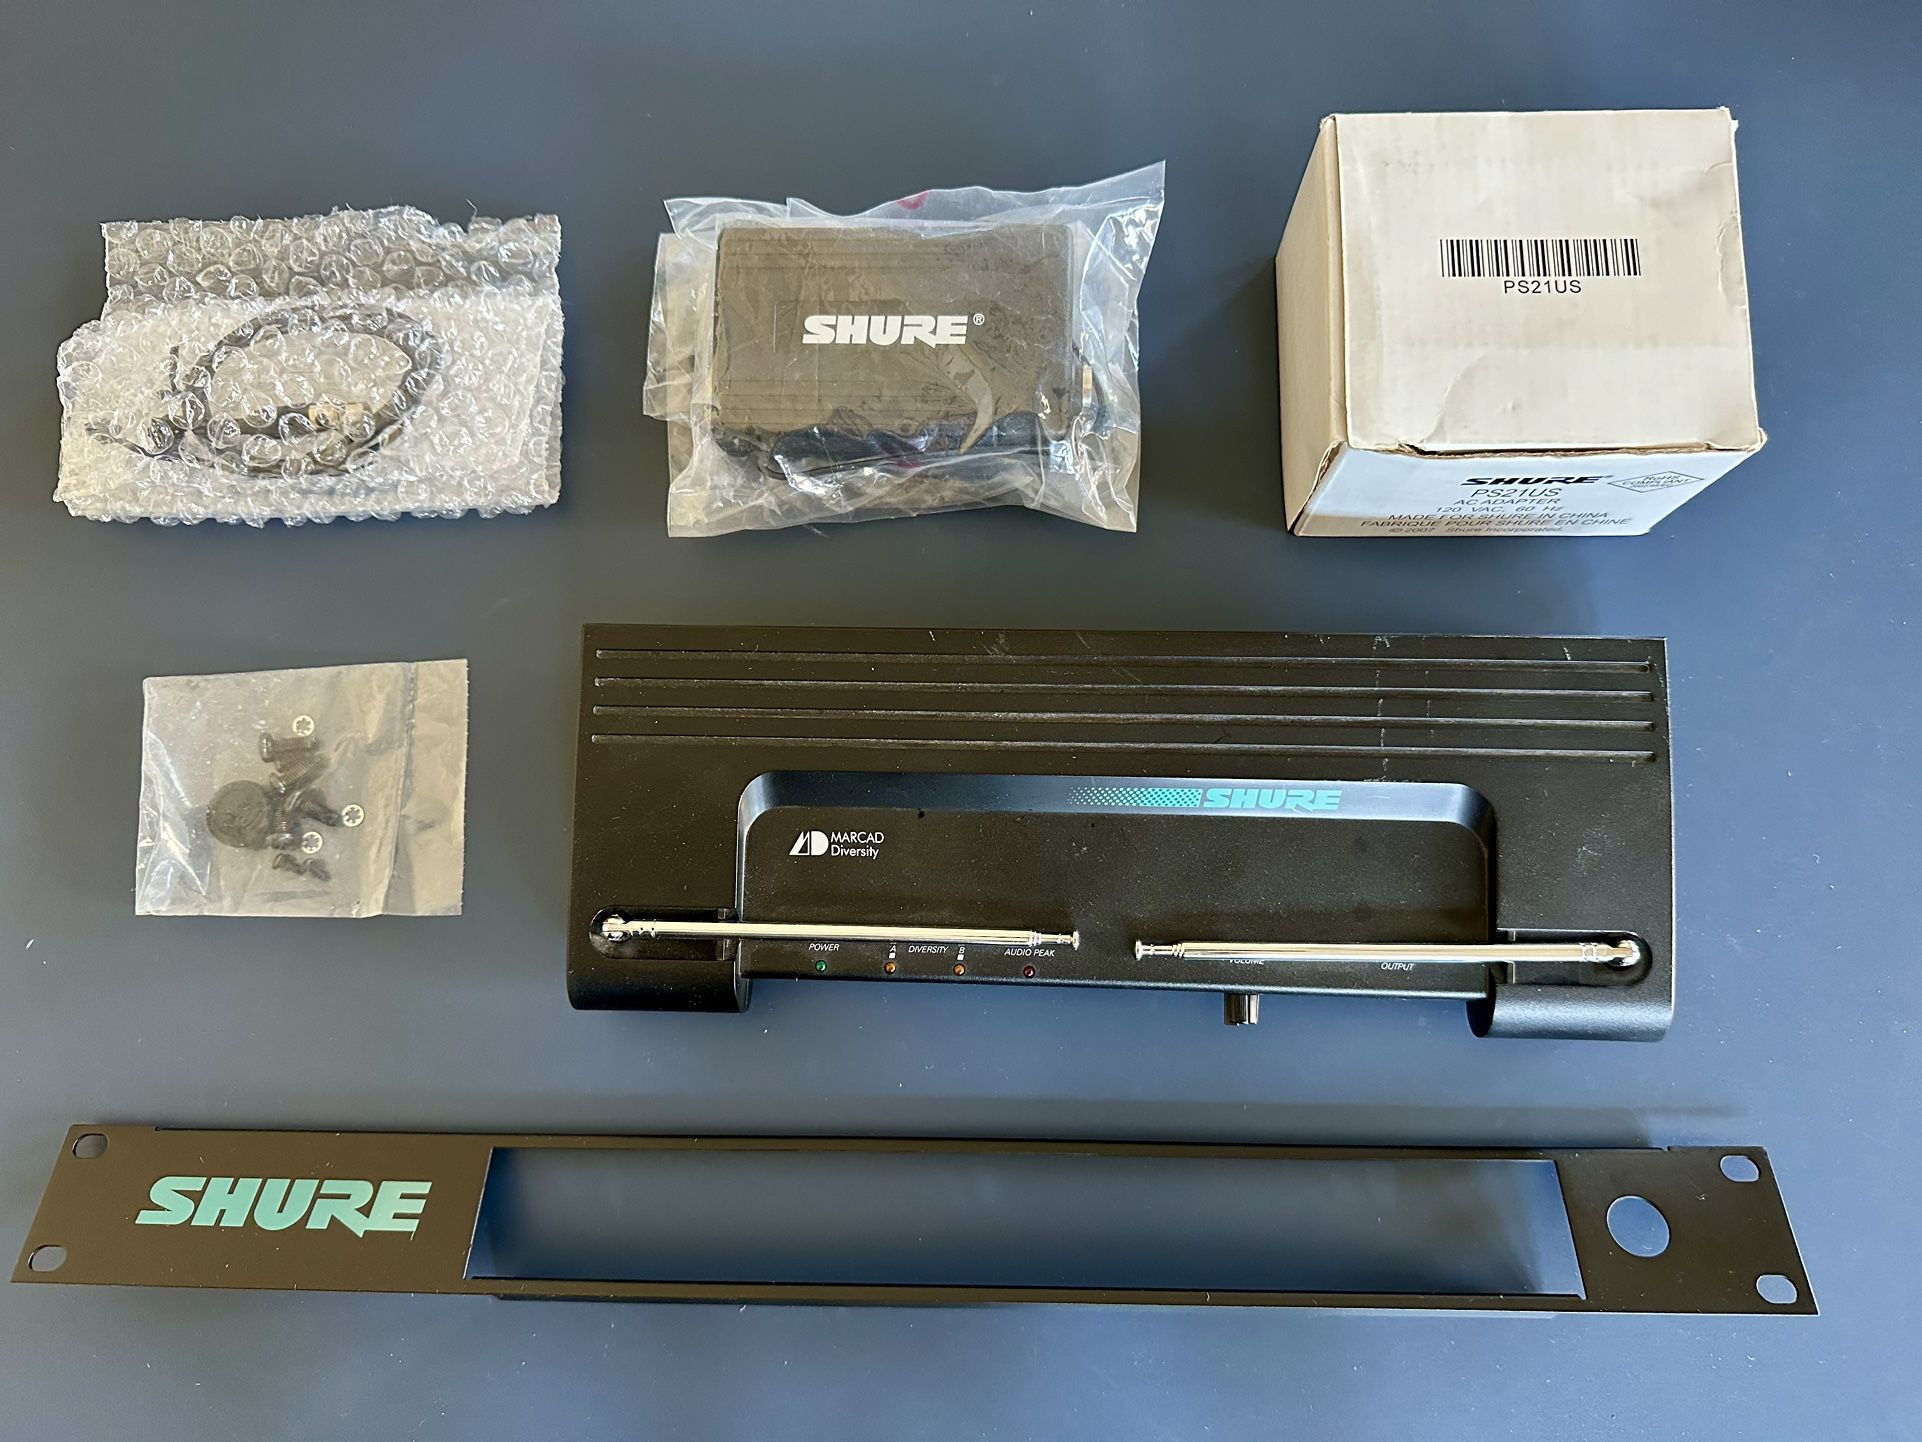 Shure T4V/93 wireless system with T1 transmitter (Made in USA)